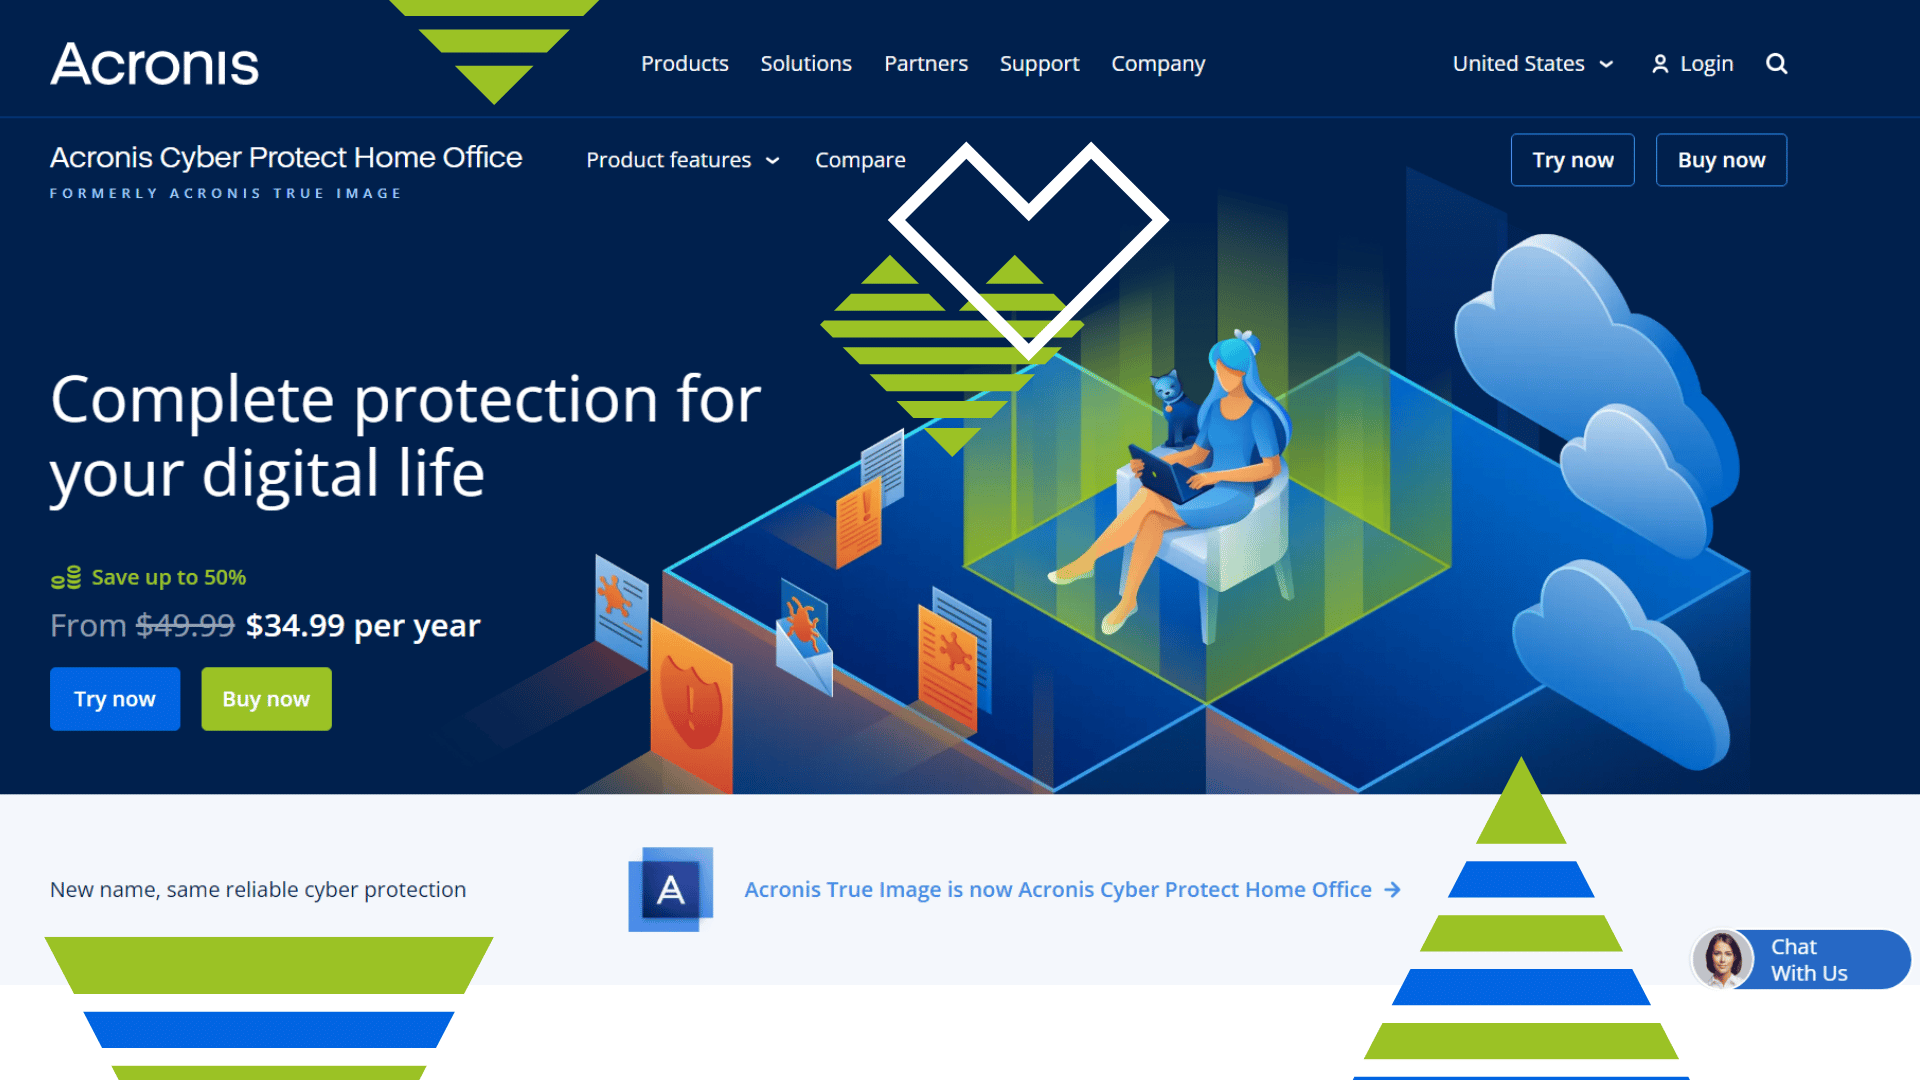 Acronis Cyber Protect Home Office Features